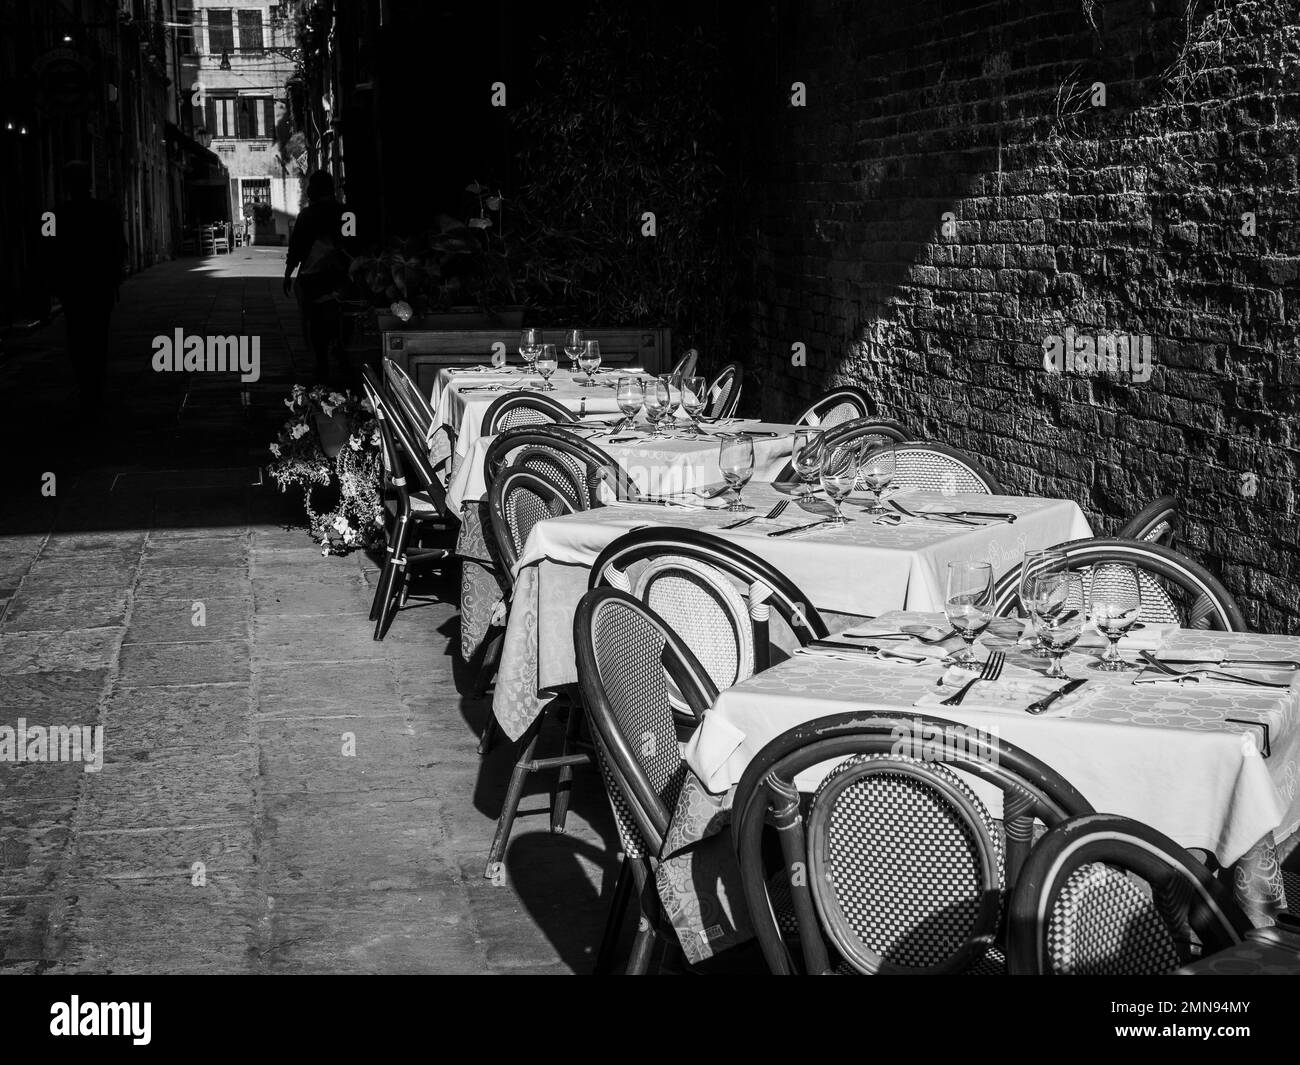 Black and white photo of restaurant tables set outdoors in the street. Stock Photo